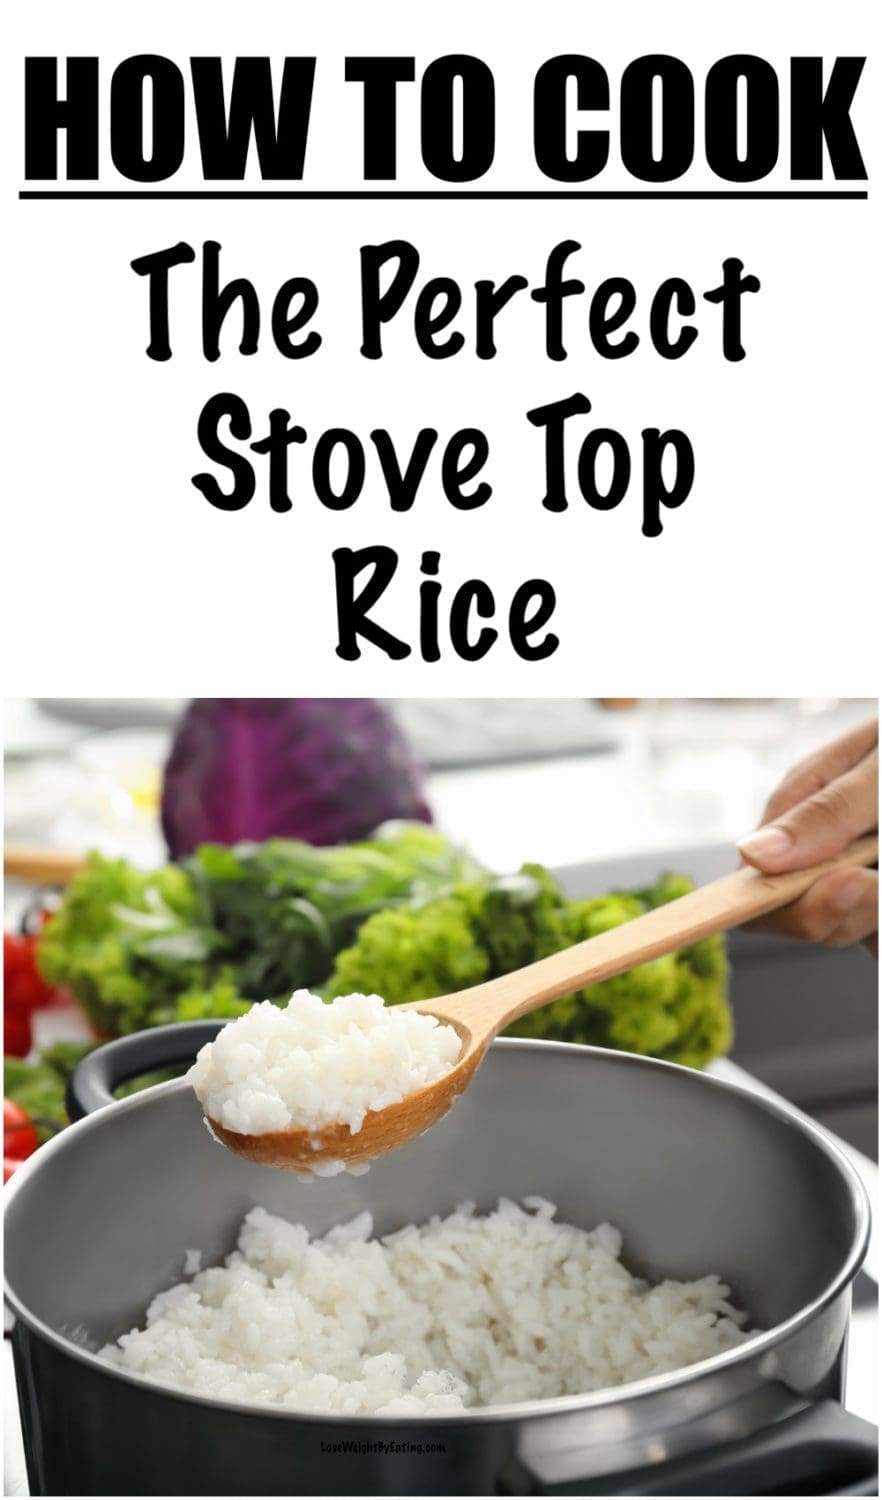 How to Cook Perfect Rice on the Stove — The Mom 100